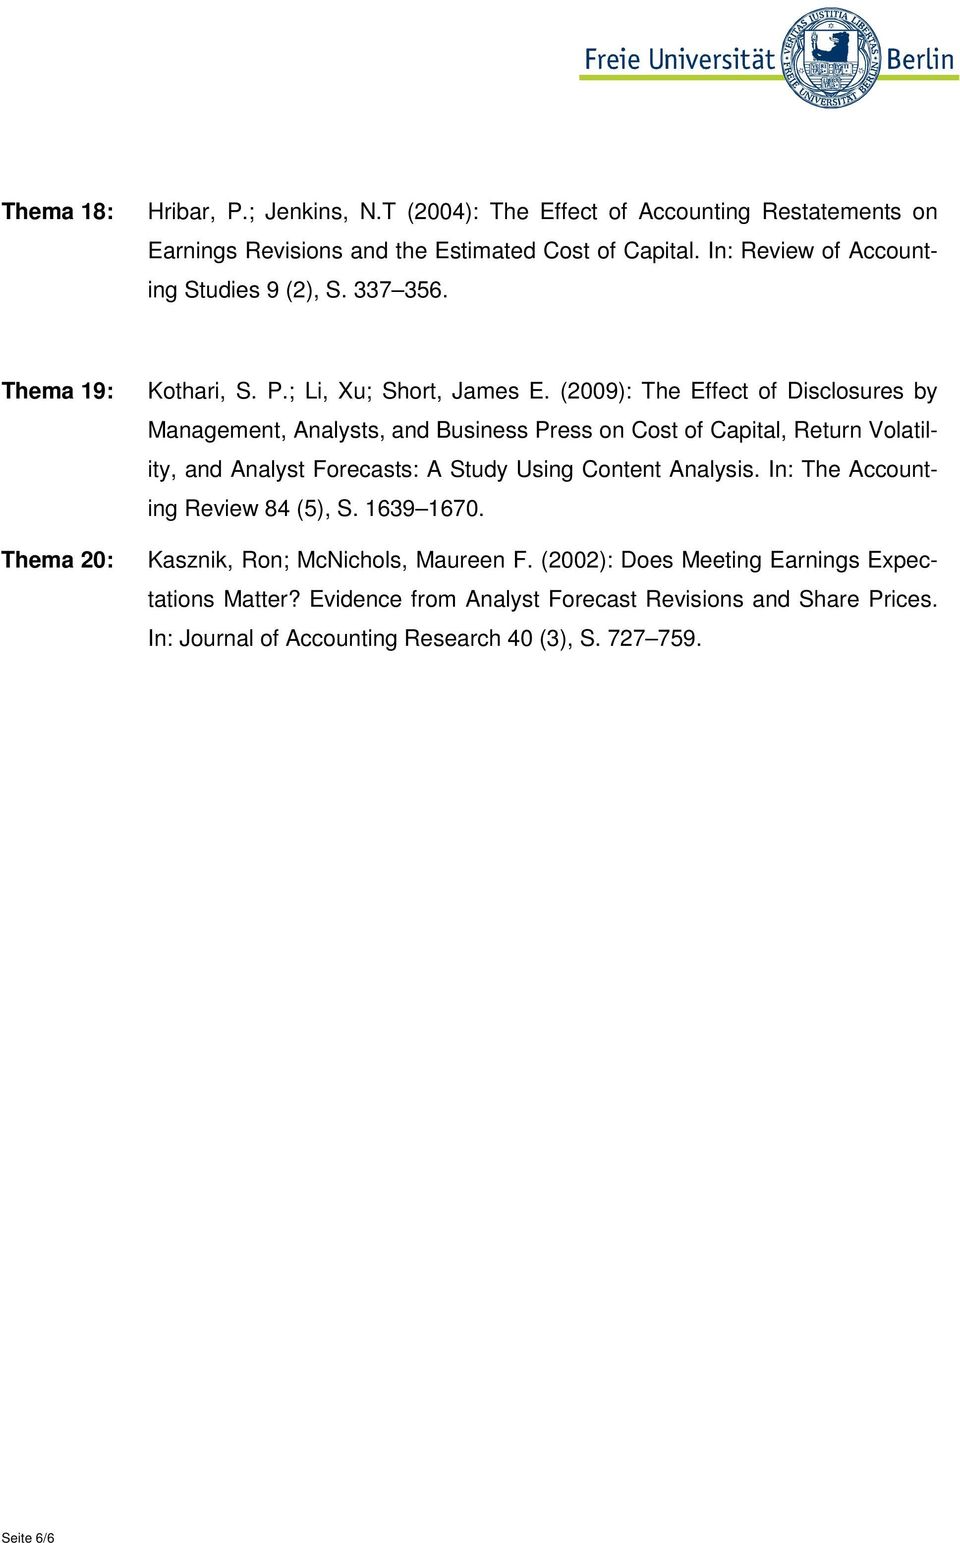 (2009): The Effect of Disclosures by Management, Analysts, and Business Press on Cost of Capital, Return Volatility, and Analyst Forecasts: A Study Using Content